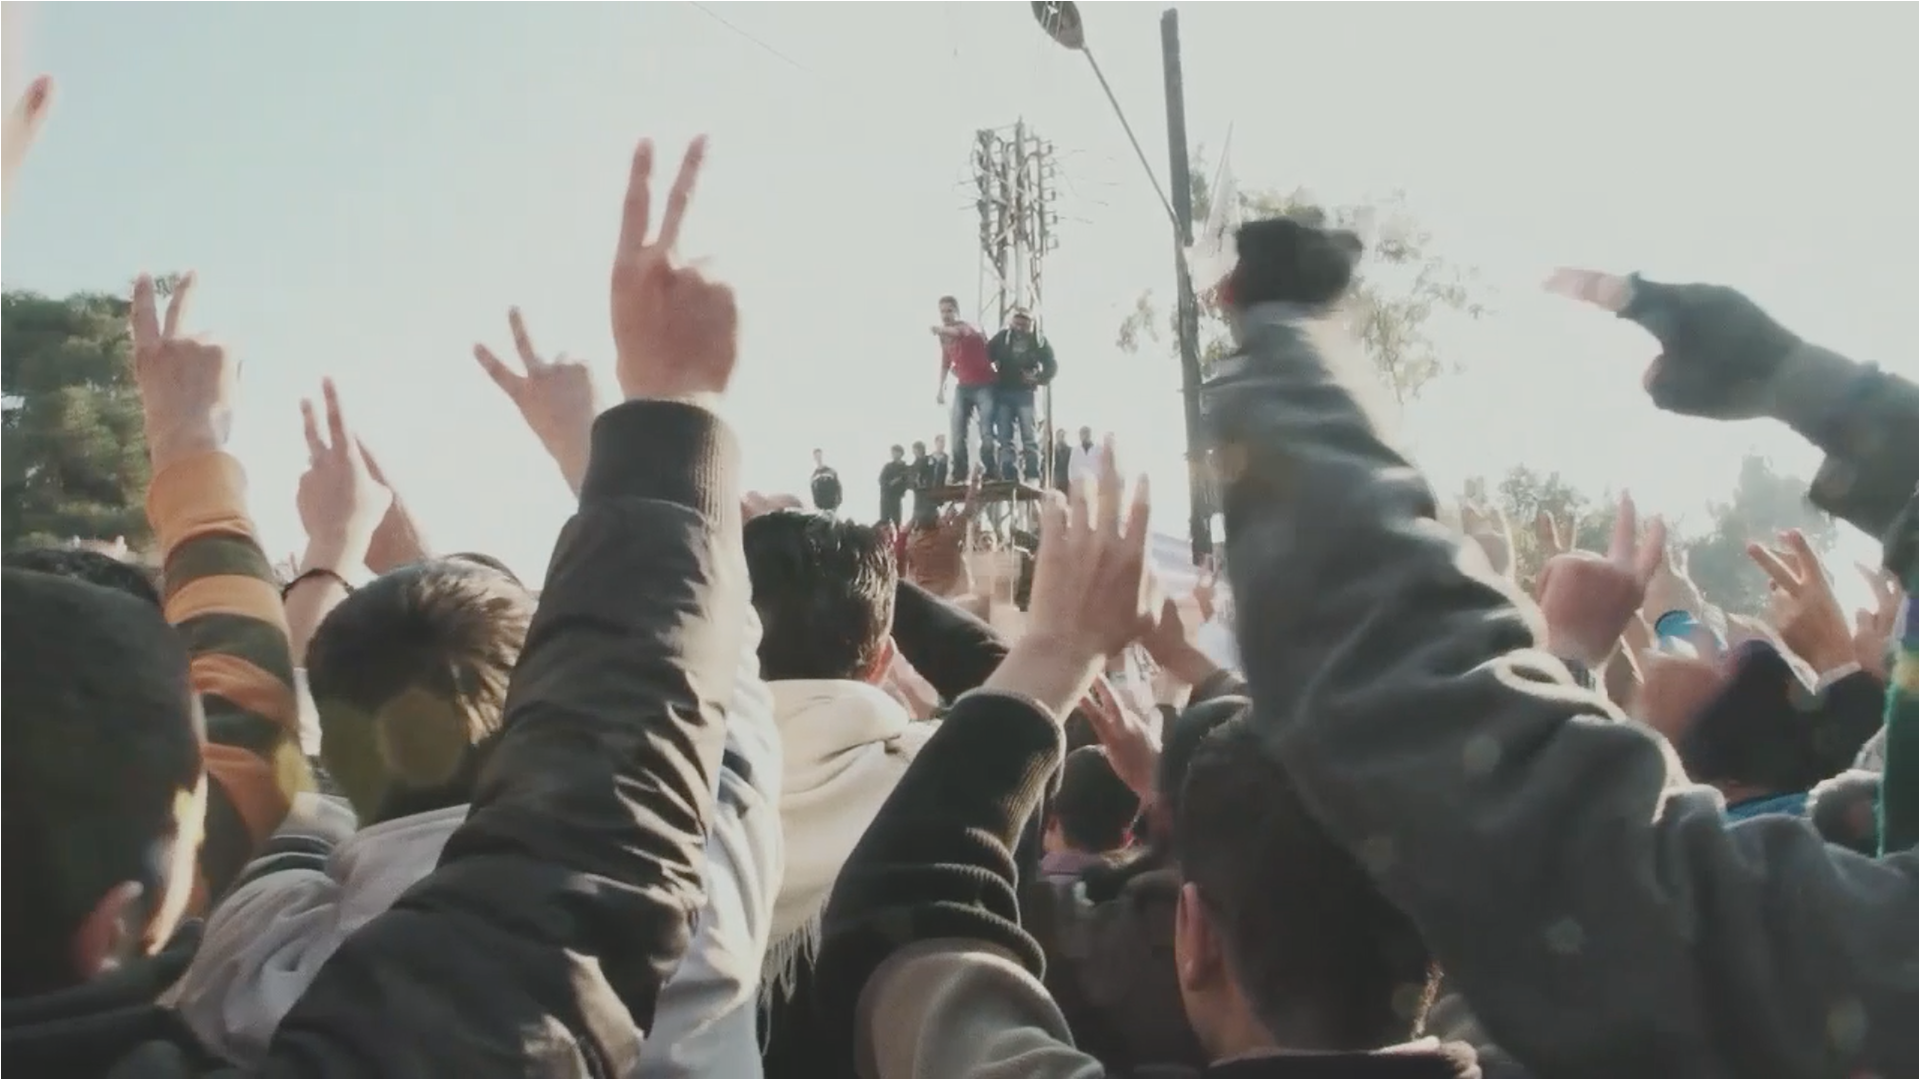 Return to Homs: Street Protests (Part 2)